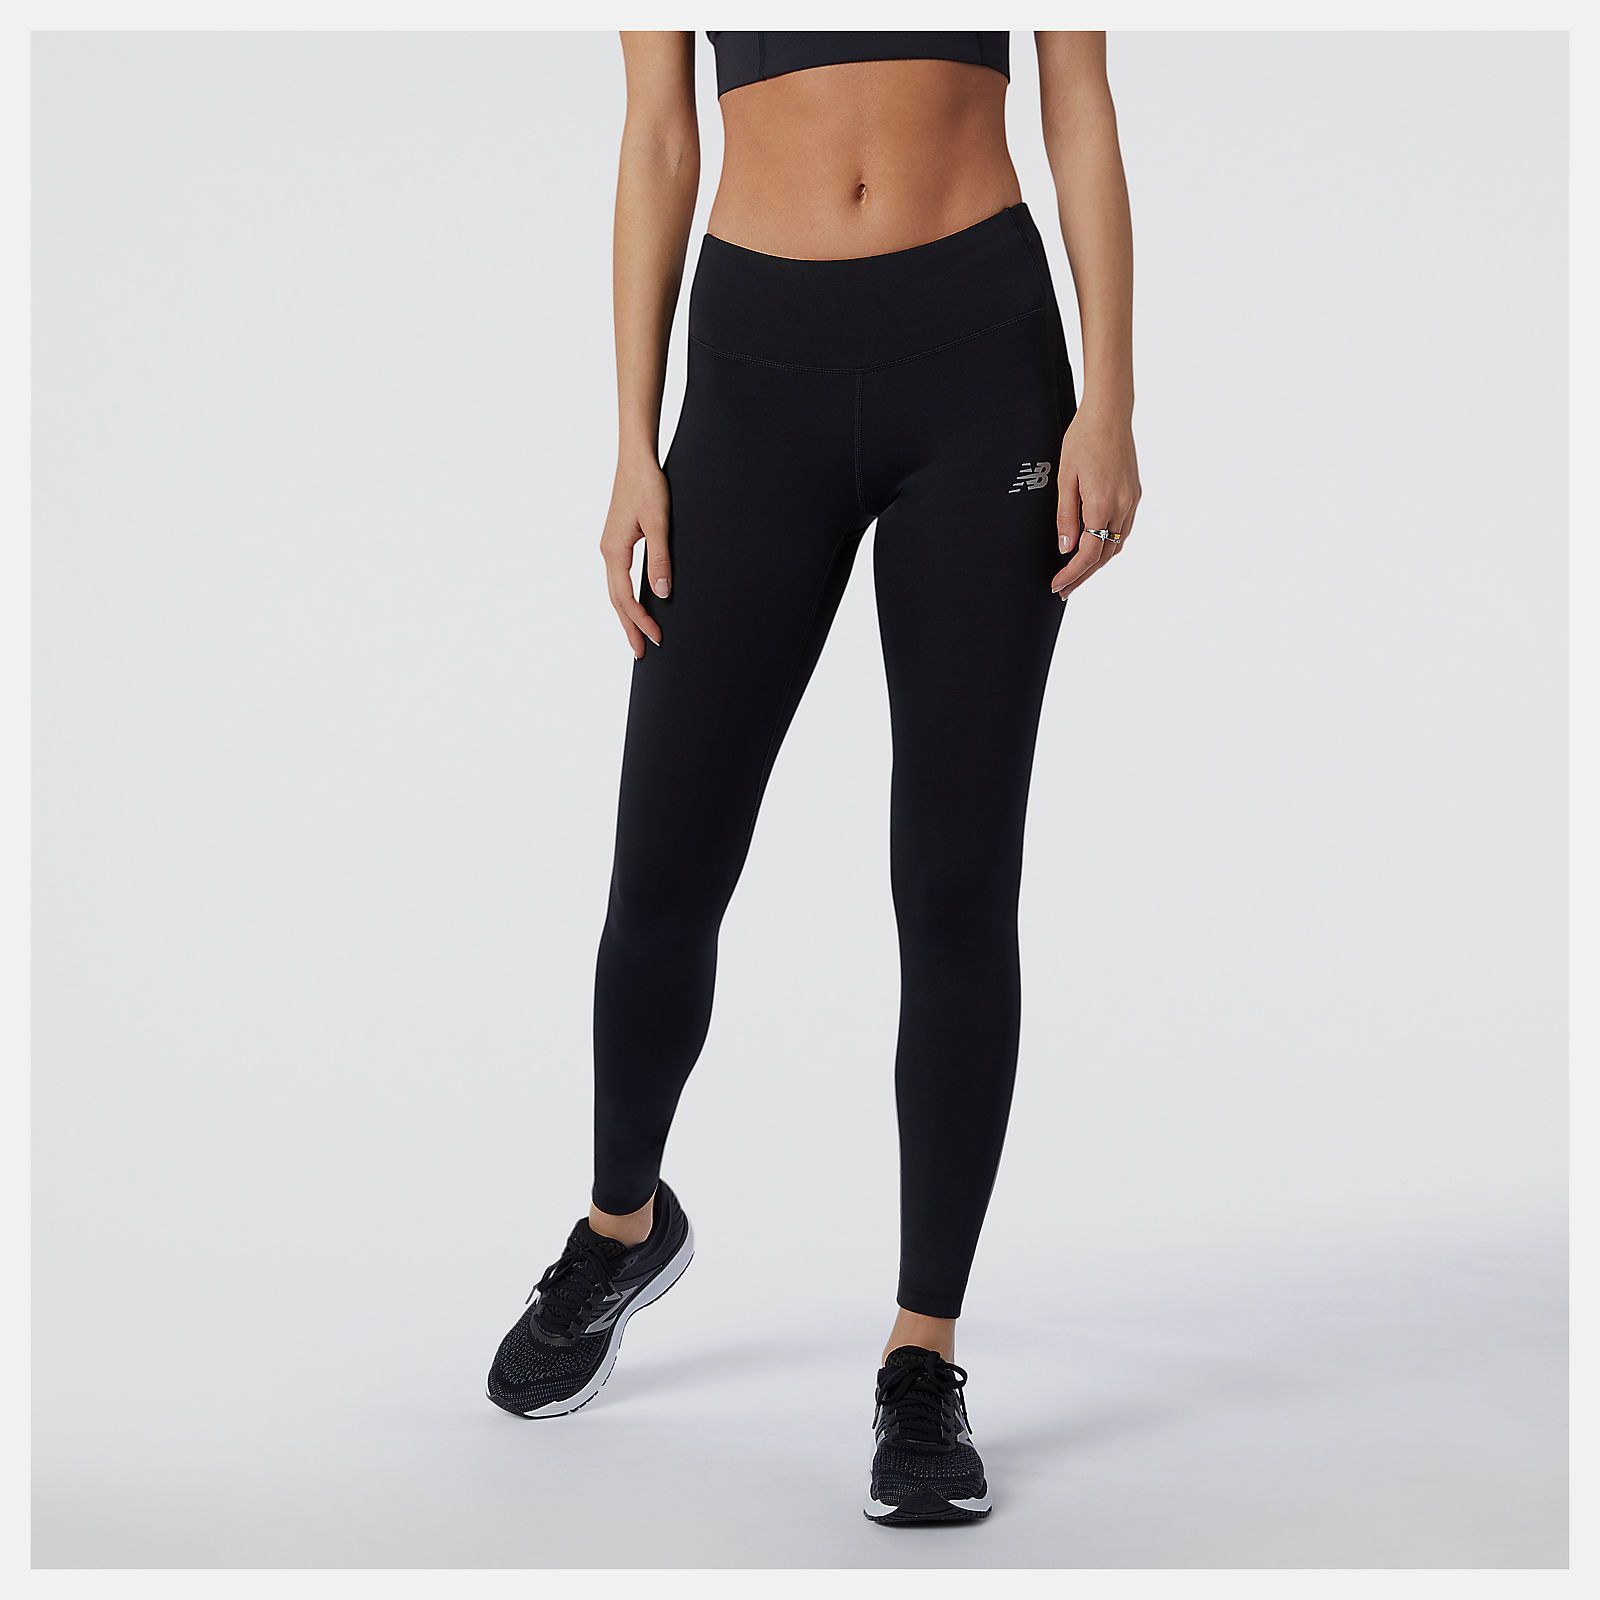 Herkenning Shetland Beyond Best gym leggings: 19 styles tried and tested by Team Cosmo